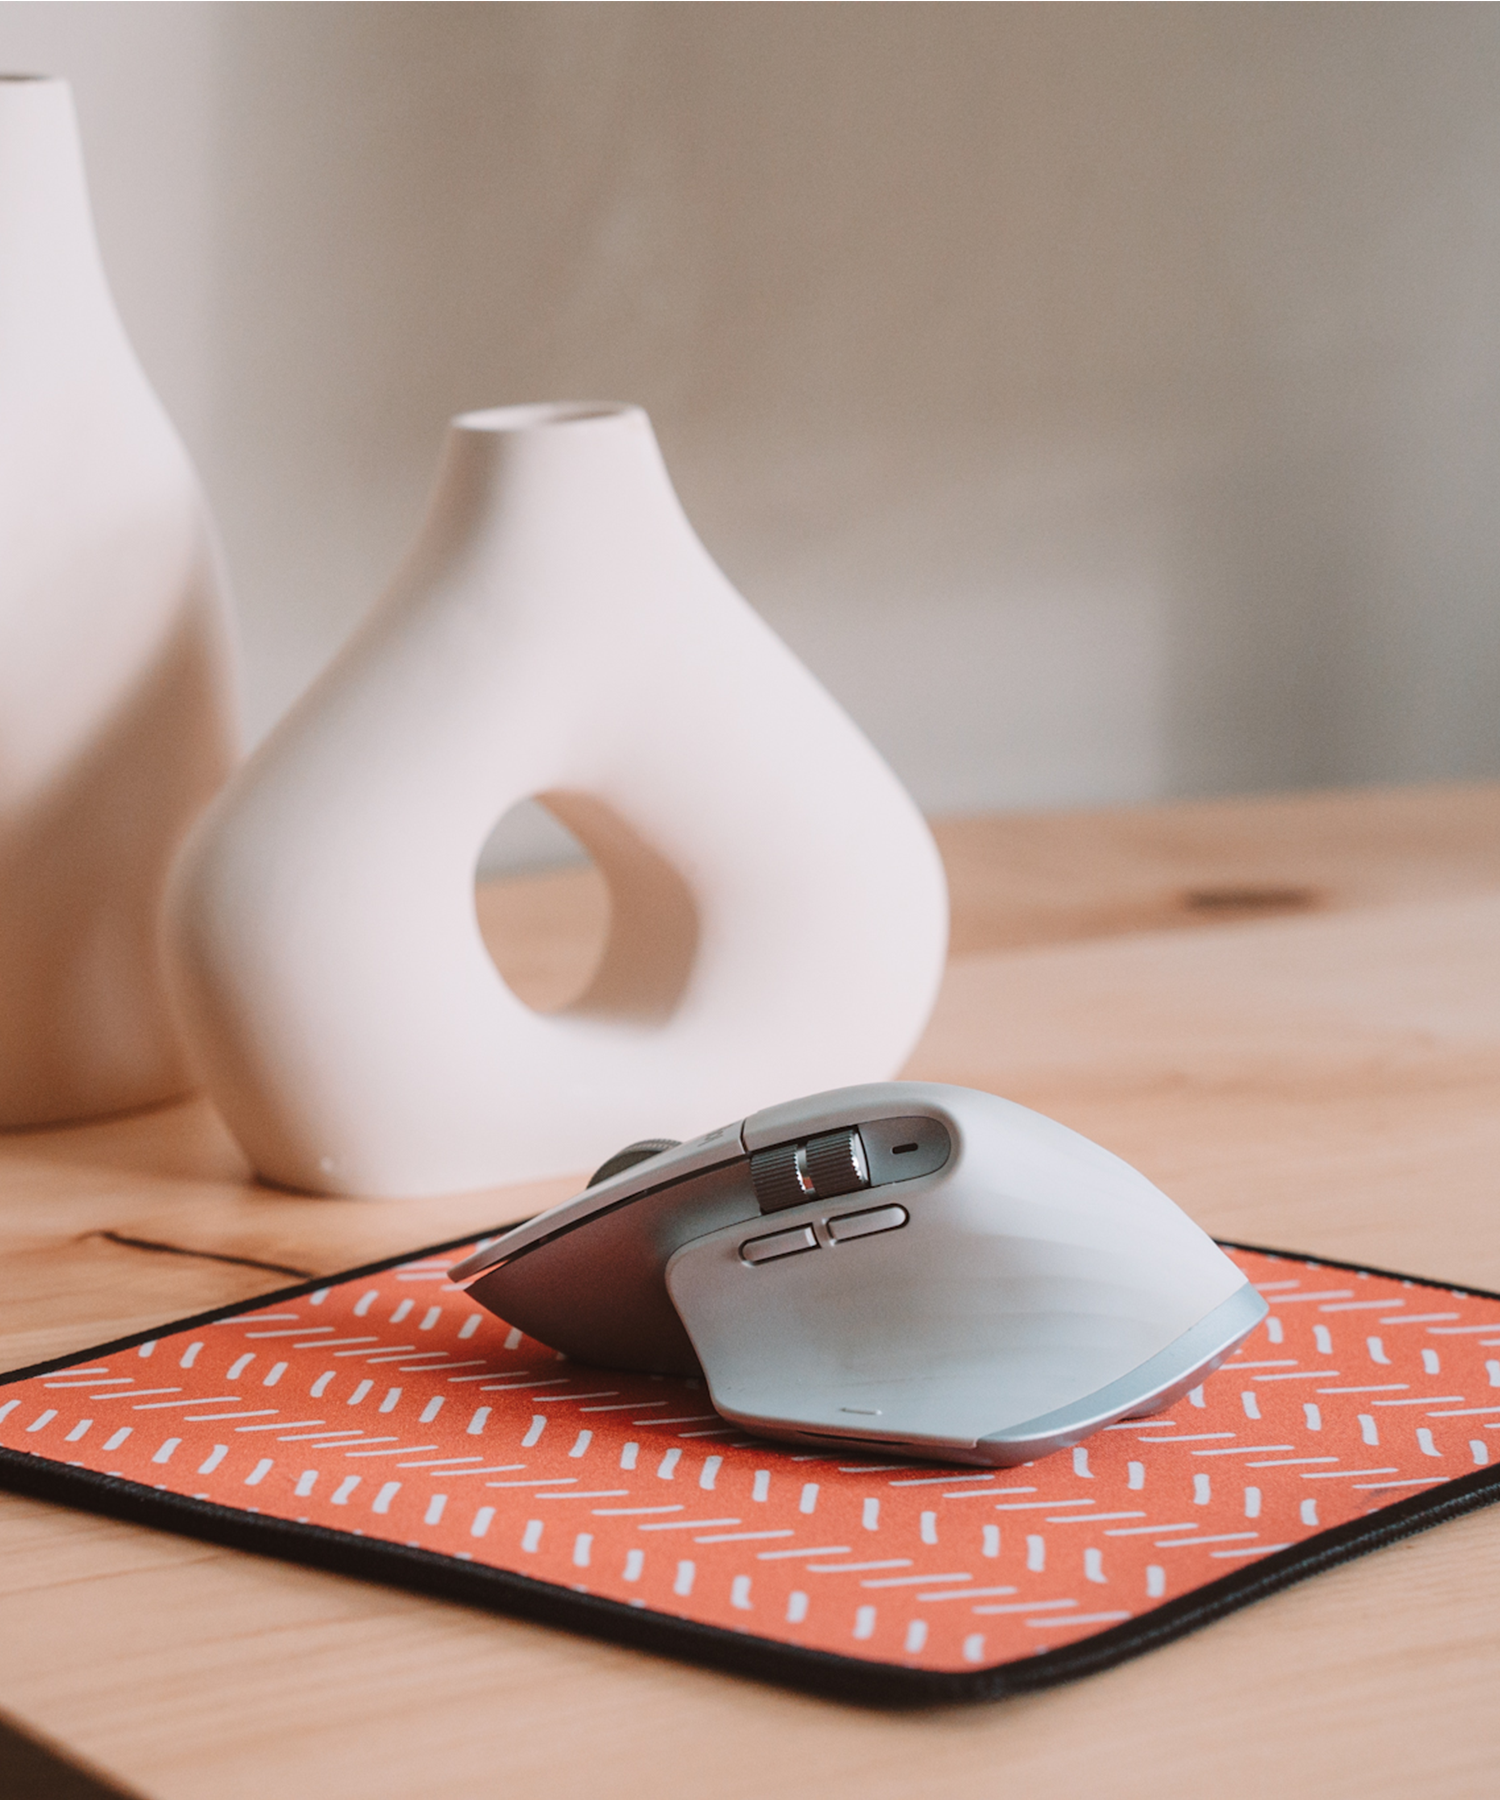 A mouse sitting on top of the Harrow mousepad. In the background, there is an asymmetrical vase.